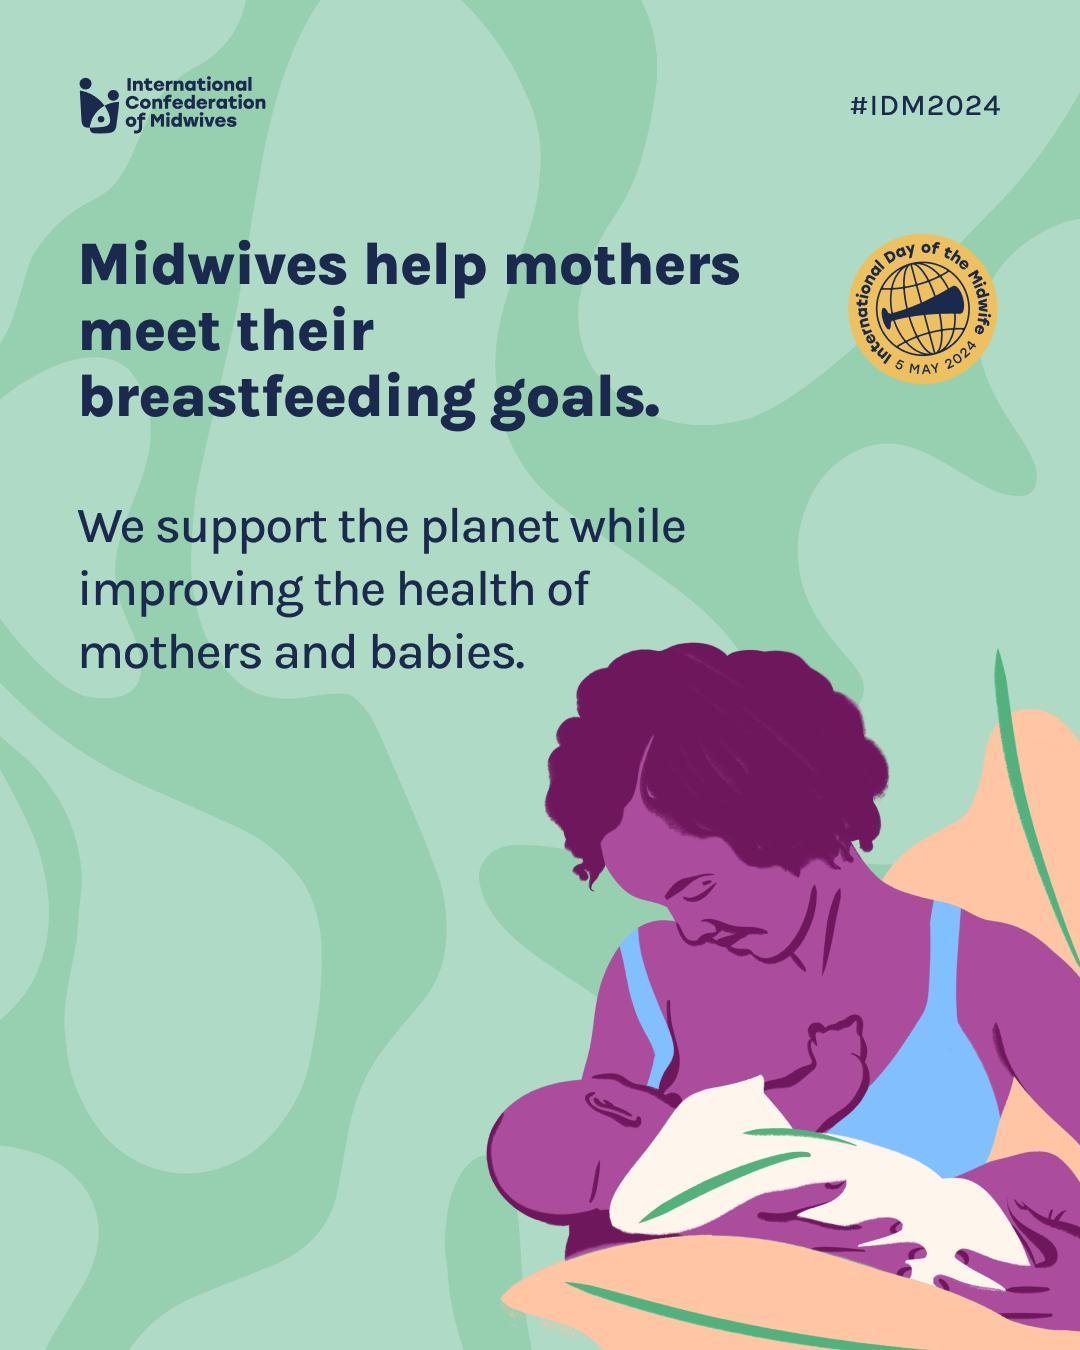 Midwives help mothers meet their breastfeeding goals - usually breastfeeding for longer. 🤱

Breastfeeding doesn&rsquo;t require packaging or shipping, saves water and improves the health of women and babies.
Midwives supporting women to breastfeed s